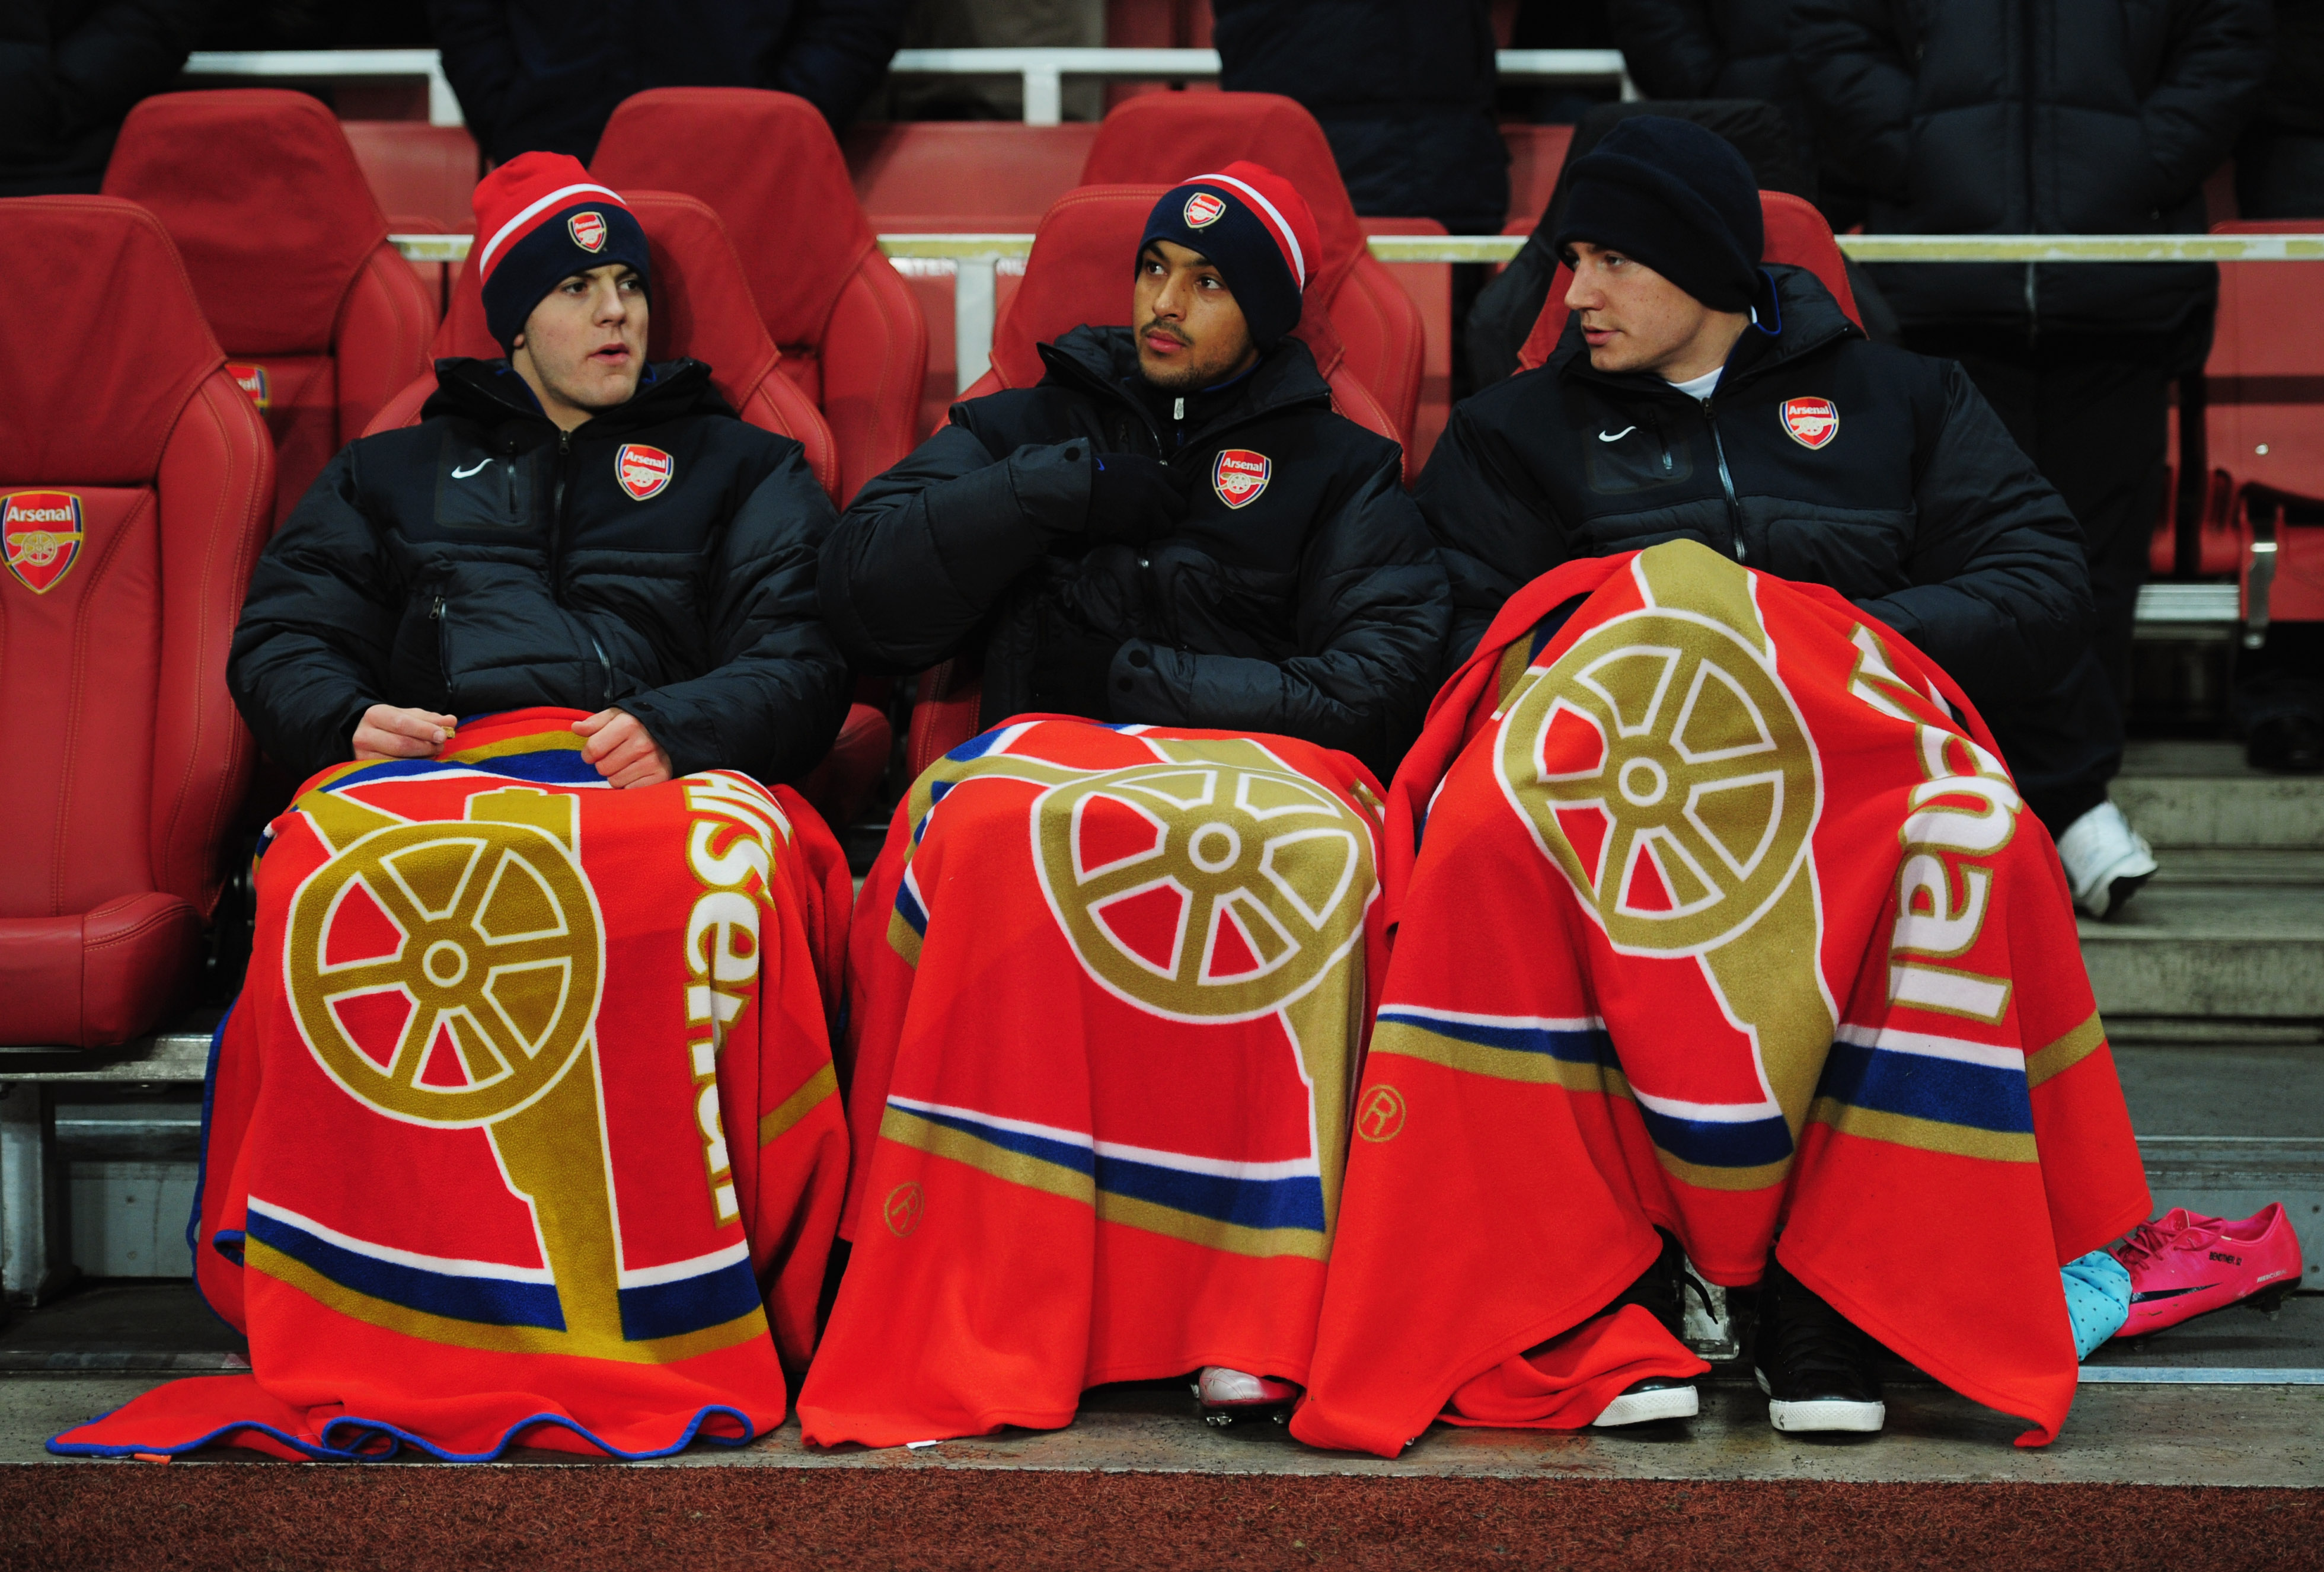 LONDON, ENGLAND - DECEMBER 08:  Substitutes Jack Wilshere, Theo Walcott and Nicklas Bendtner of Arsenal attempt to keep warm as they sit on the bench prior to the UEFA Champions League Group H match between Arsenal and FK Partizan Belgrade at the Emirates